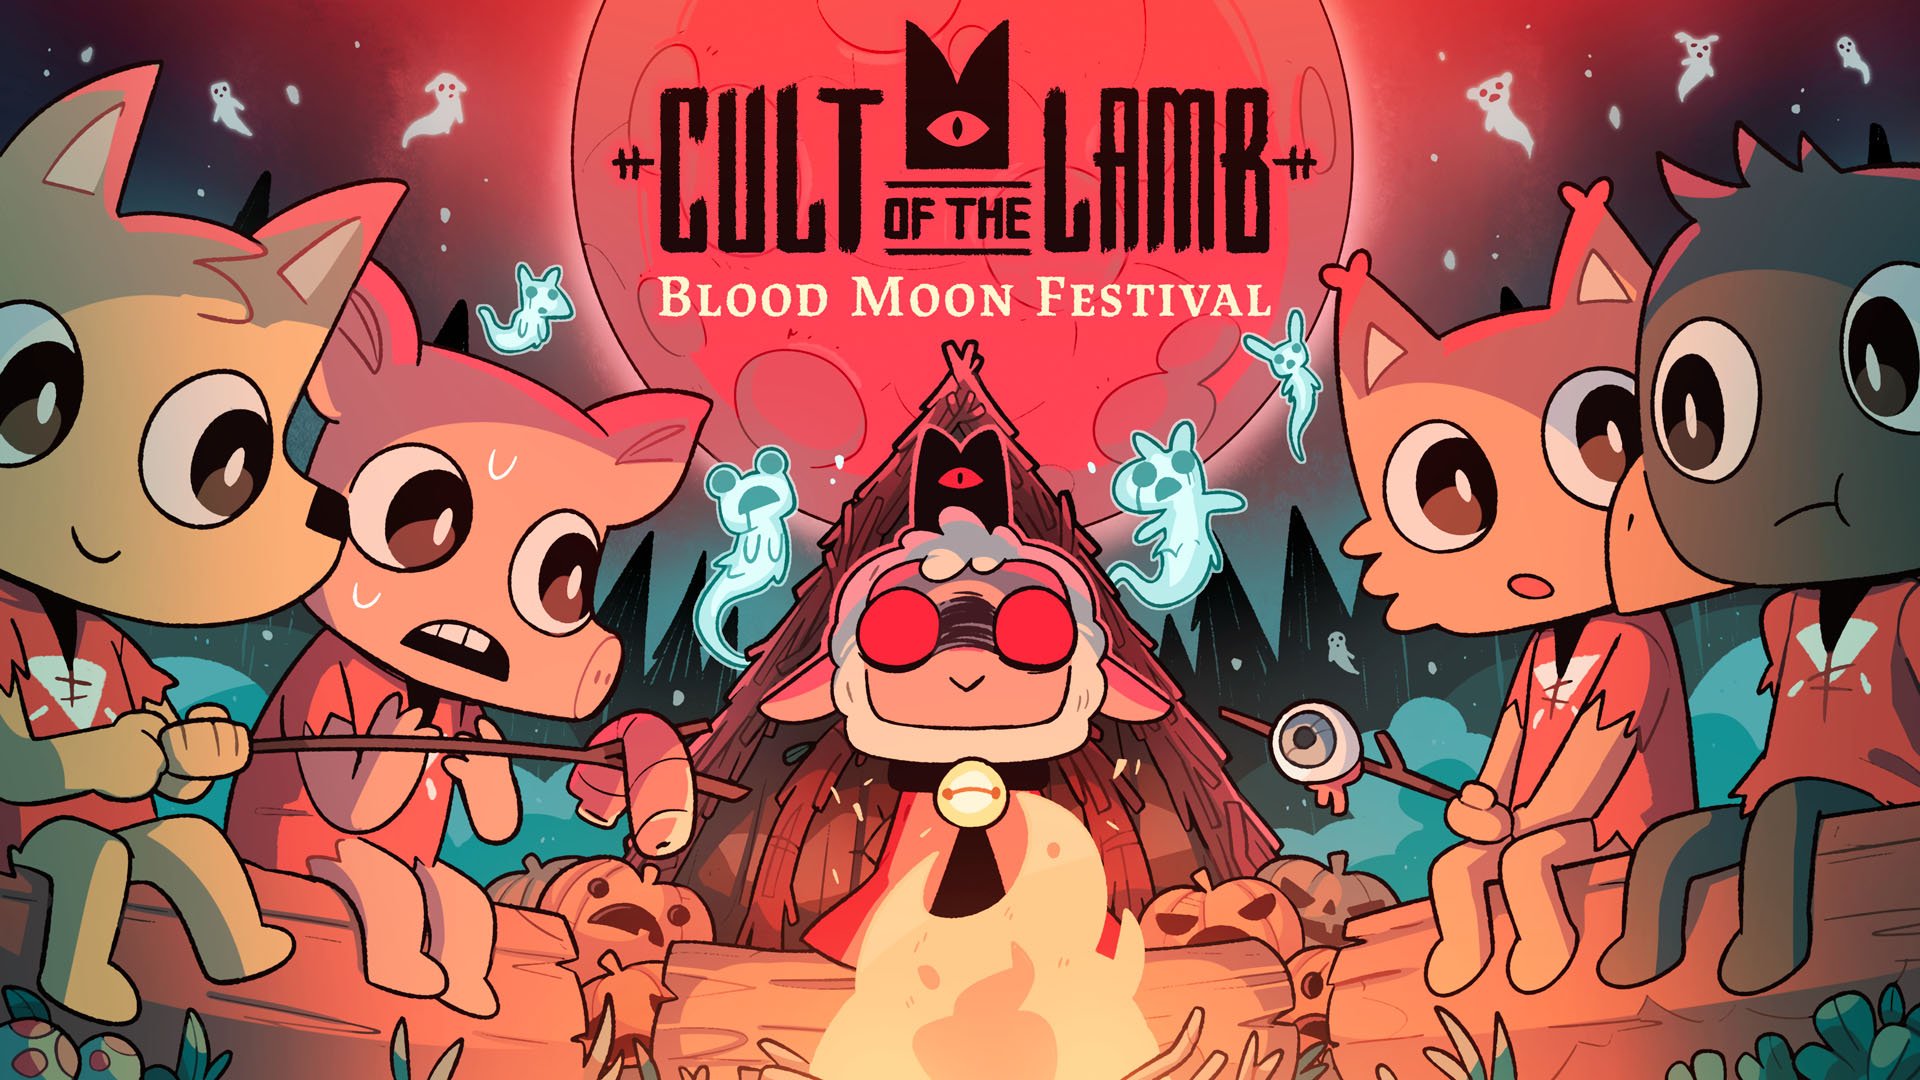 How long is Cult of the Lamb?